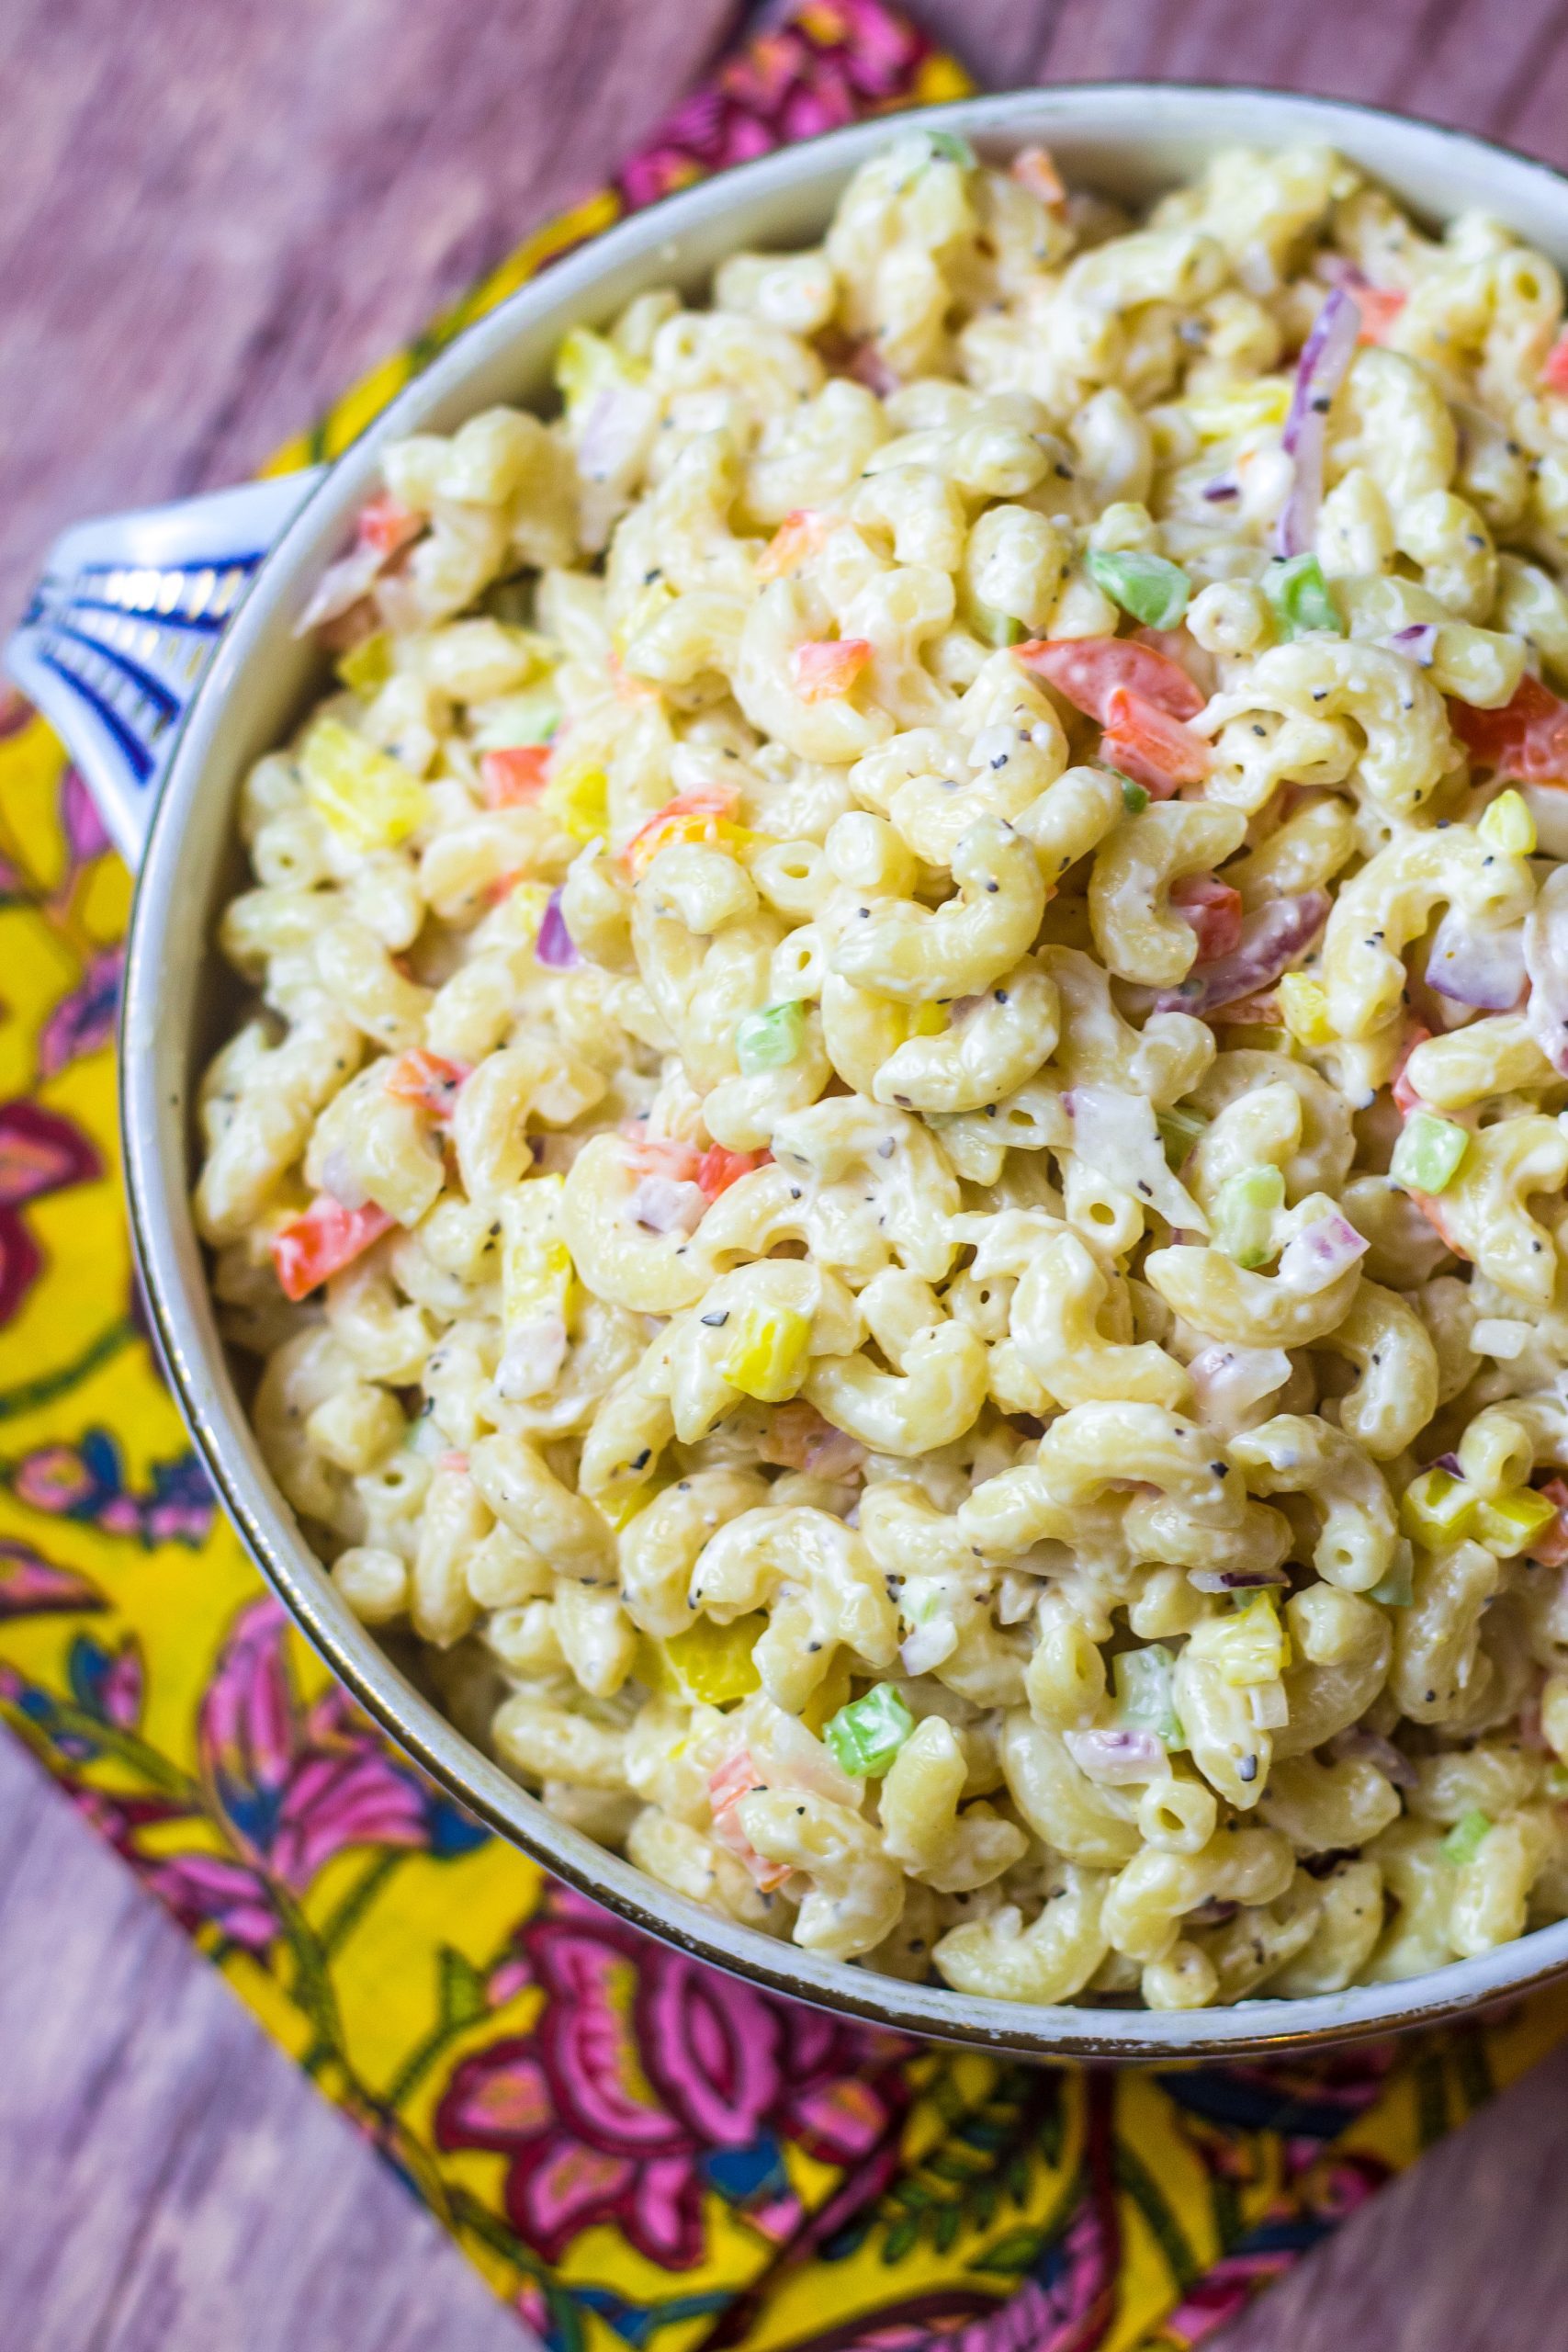 This southern macaroni salad is the perfect summer side dish. It's creamy, sweet, and the best accompaniment to your barbeque or cookout. All you'll have to do is boil your noodles, chop your veggies then literally mix all of your ingredients together. It's that simple. Plus, it will keep in the fridge for a couple of days, so it's a great make-ahead dish. Read along to see how to make southern macaroni salad in no time.